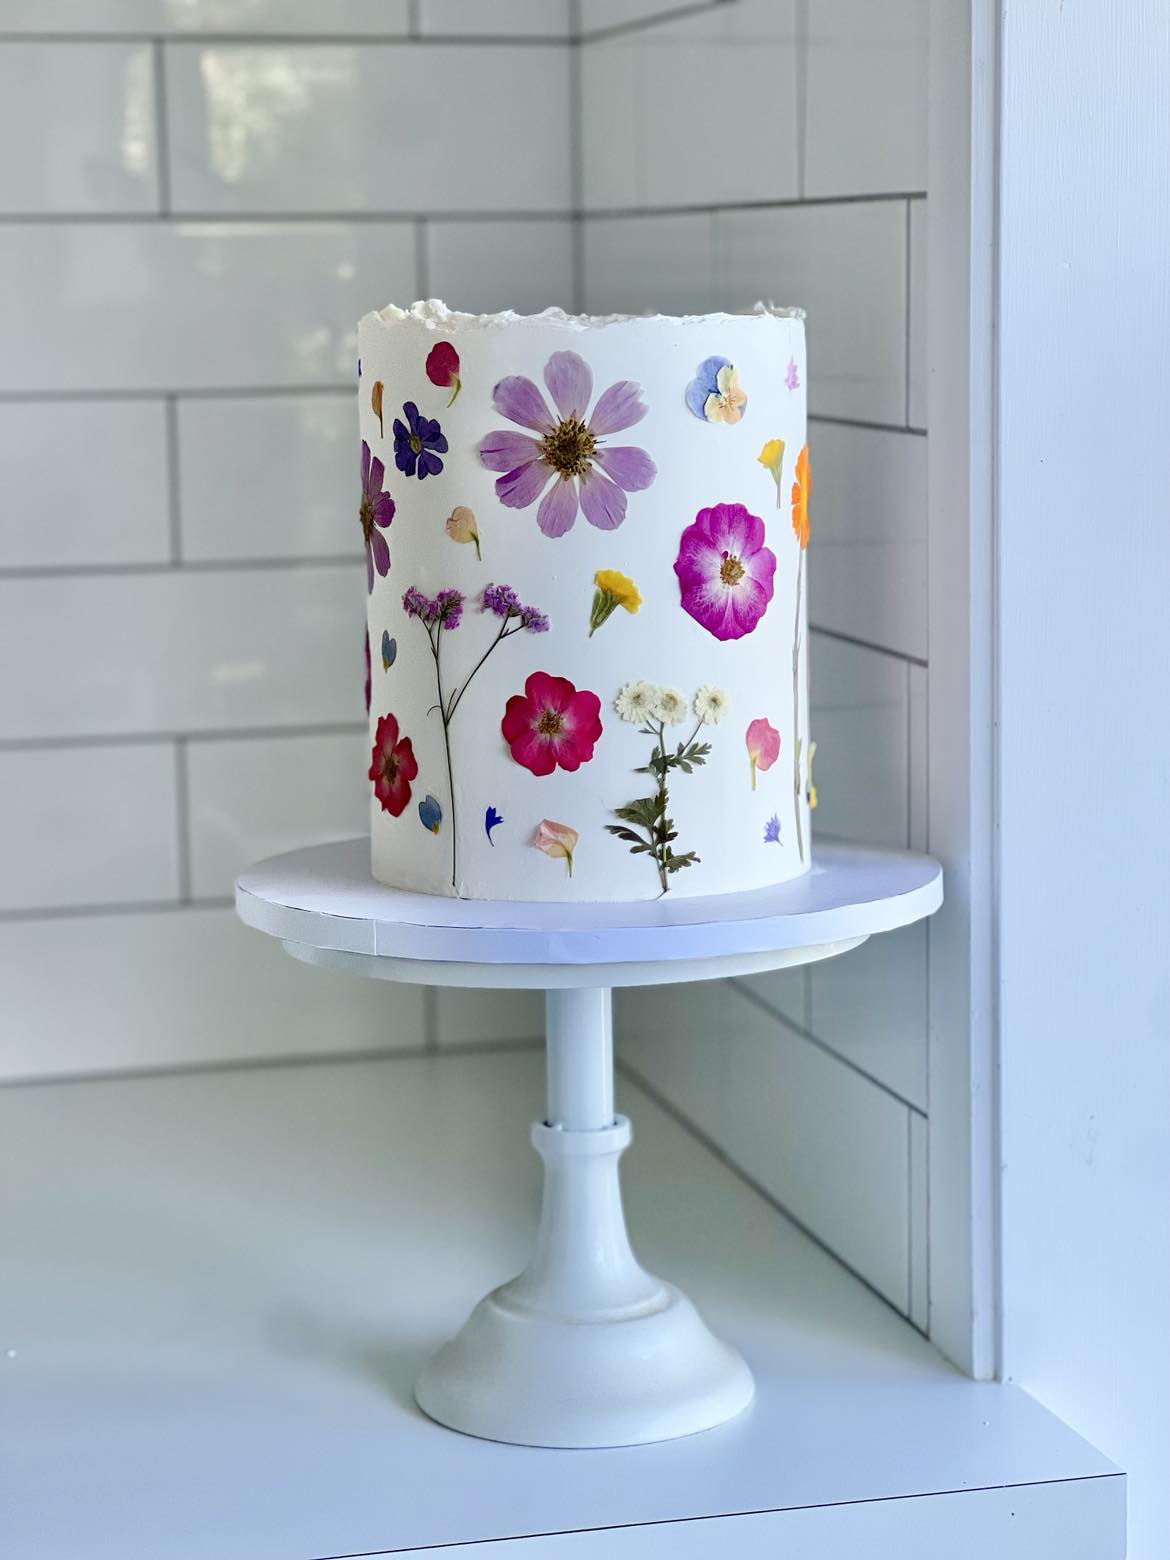 Pressed flowers cake decorating class - Monday April 15th, 6-8pm